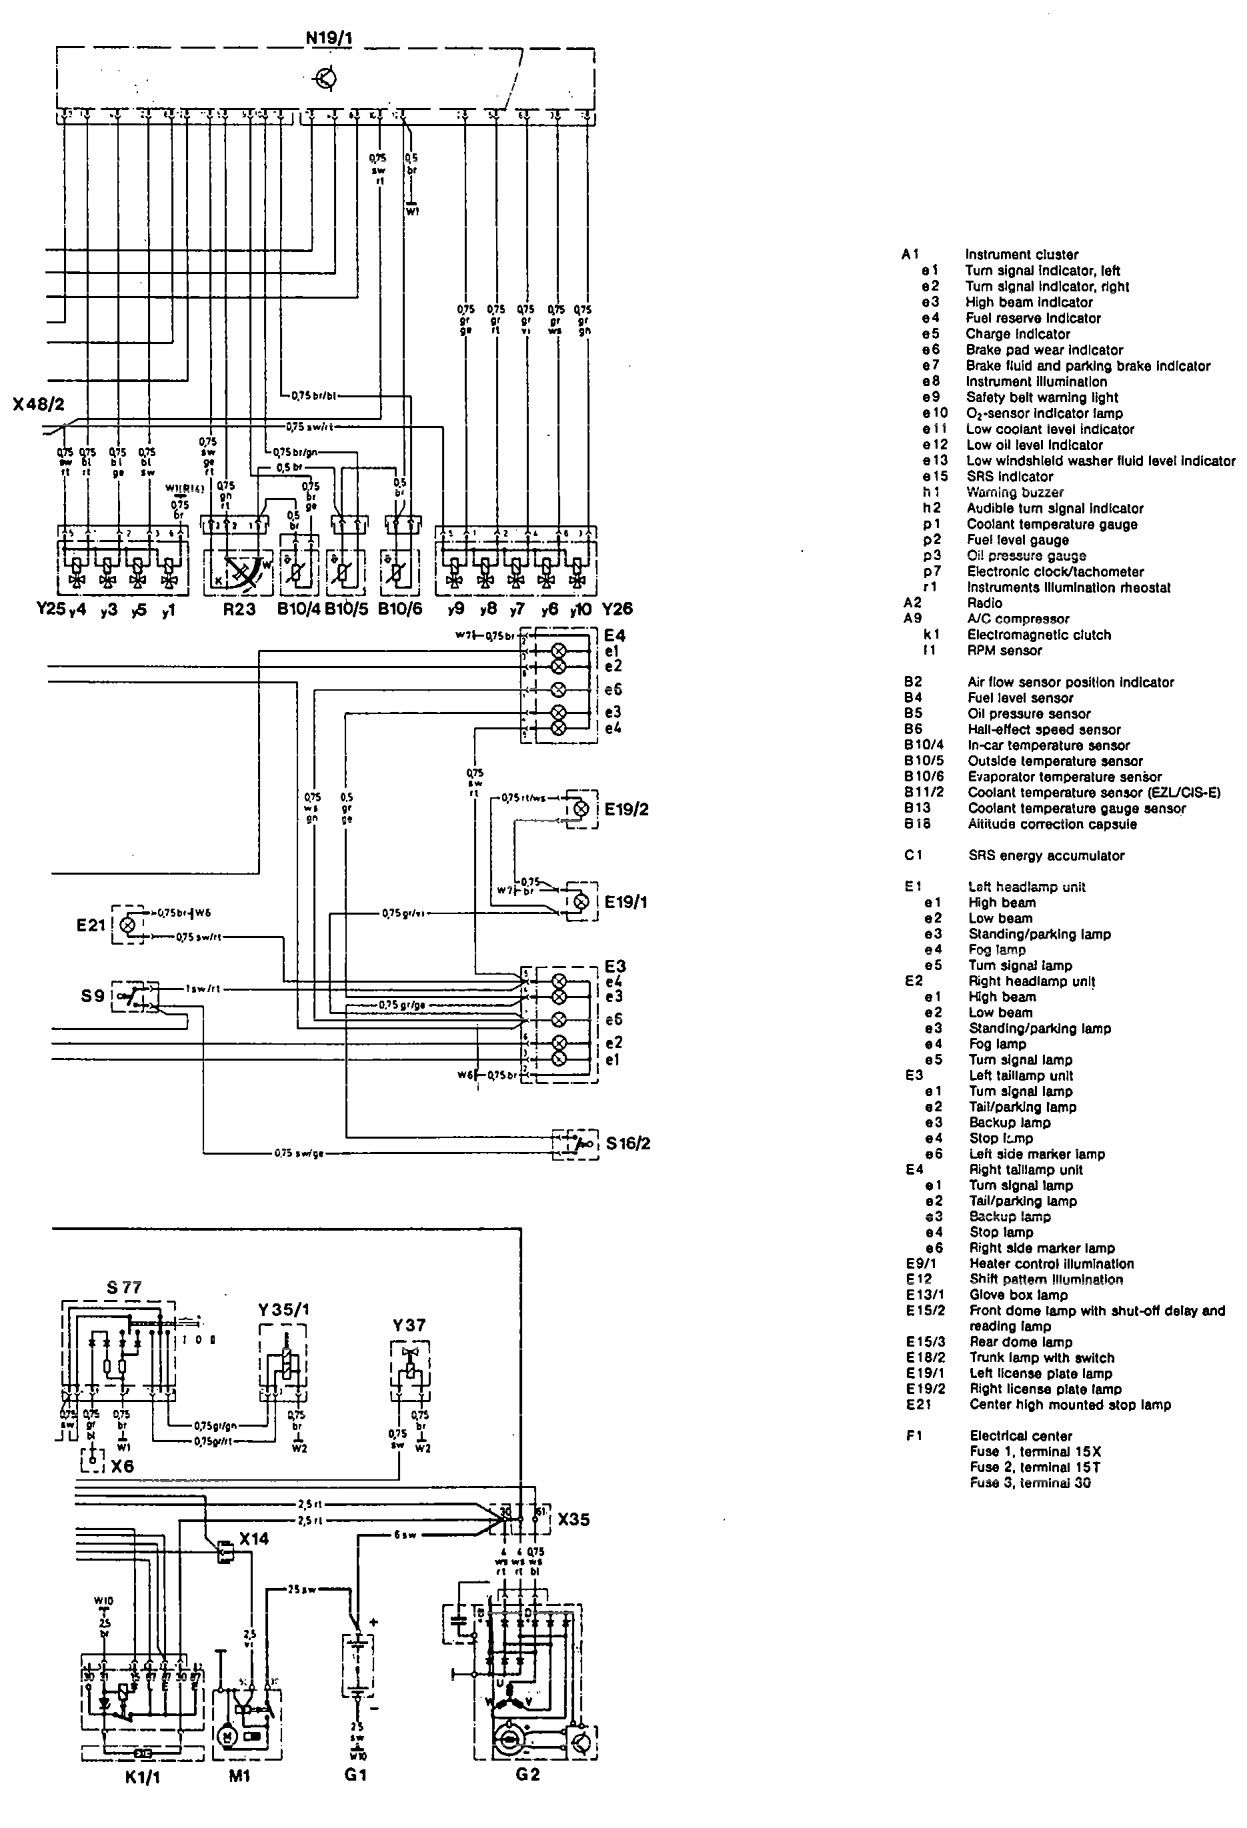 Mercedes 190E (1992) - wiring diagrams - ignition - Carknowledge.info